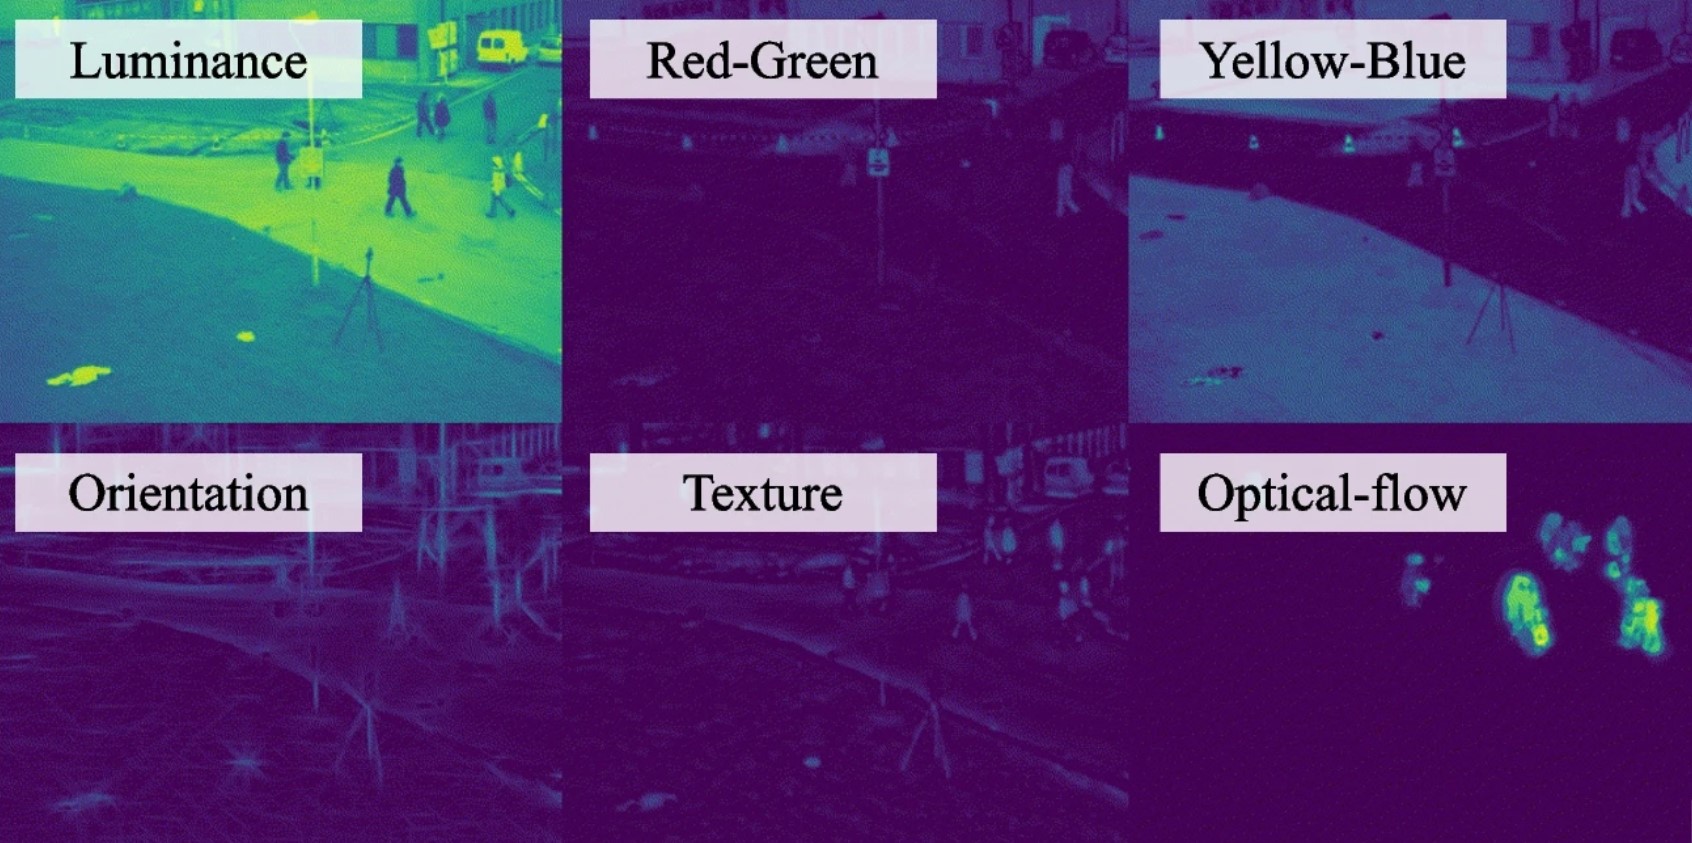 An example of which low-level visual features were extracted from the surveillance footage as part of the current study. This figure is an array of 6 images, arranged in two rows of three photos. The non-salient backgrounds of the images are shown in dark purple, while the brighter green colors indicate which parts of the scene have higher salience of the selected features. Starting in the top left, these features are: luminance (brightness), red-green color channel, yellow-blue color channel, orientation (of lines and edges), texture, and optical flow (motion).